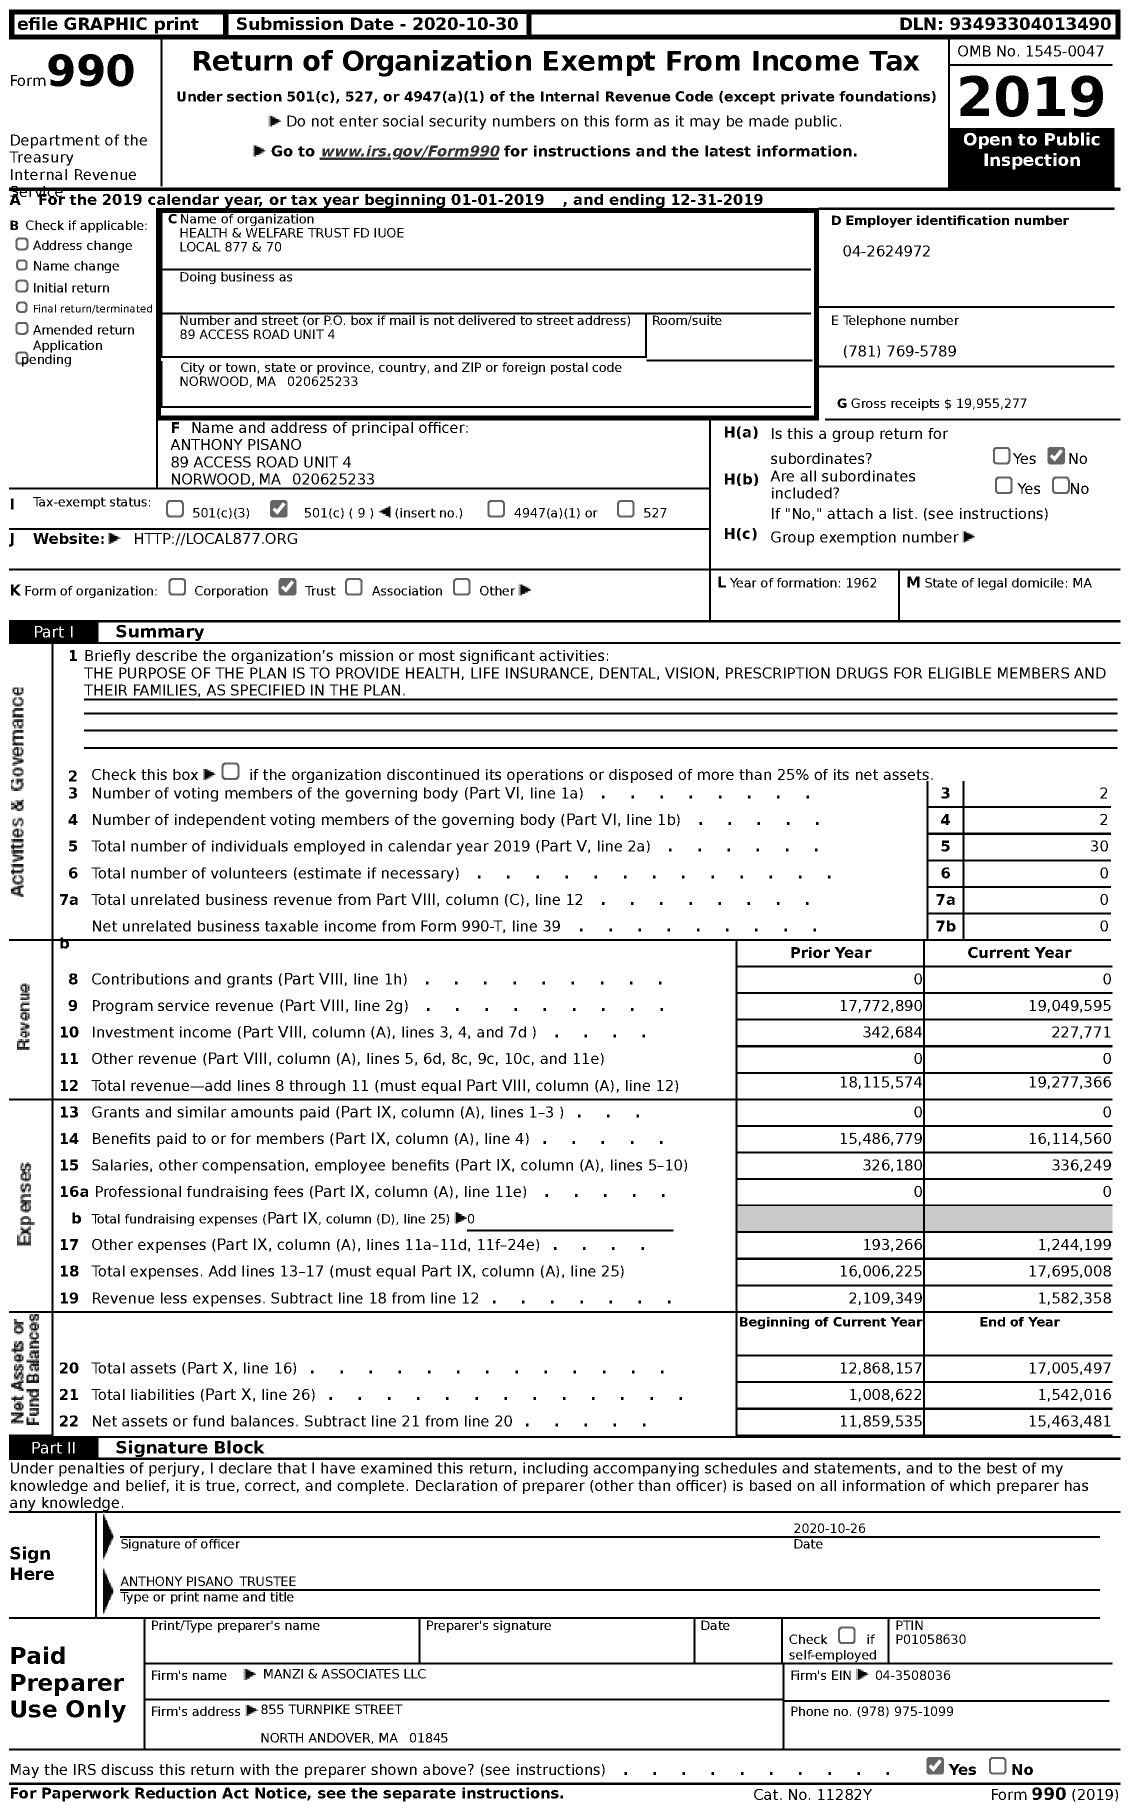 Image of first page of 2019 Form 990 for Health and Welfare Trust Fund Iuoe Local 877 and 70